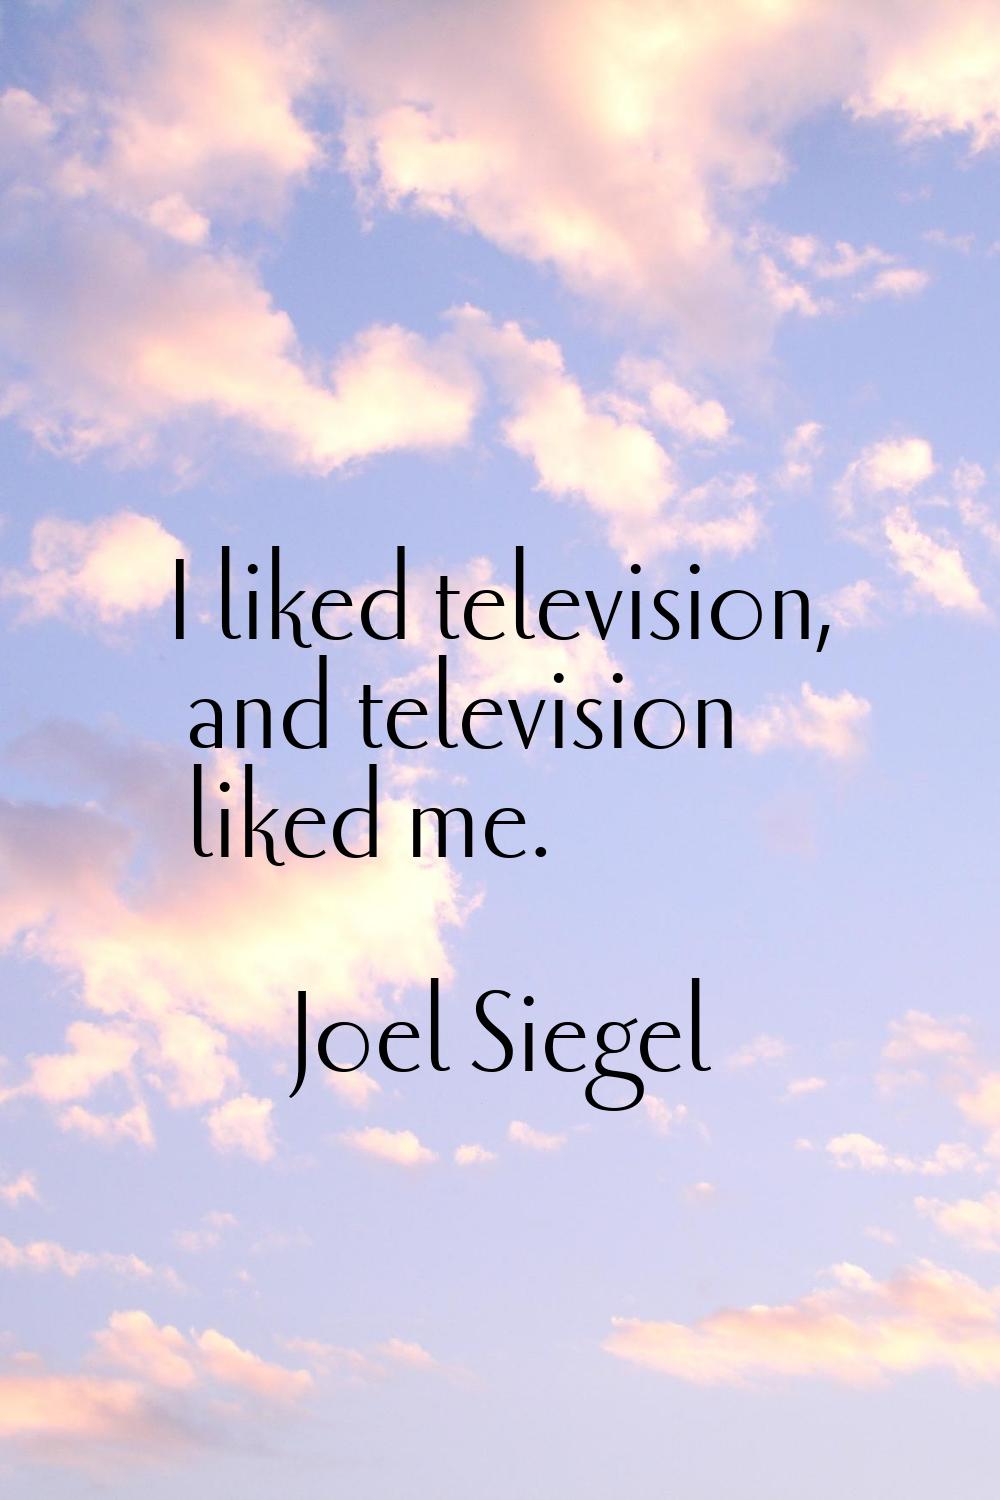 I liked television, and television liked me.